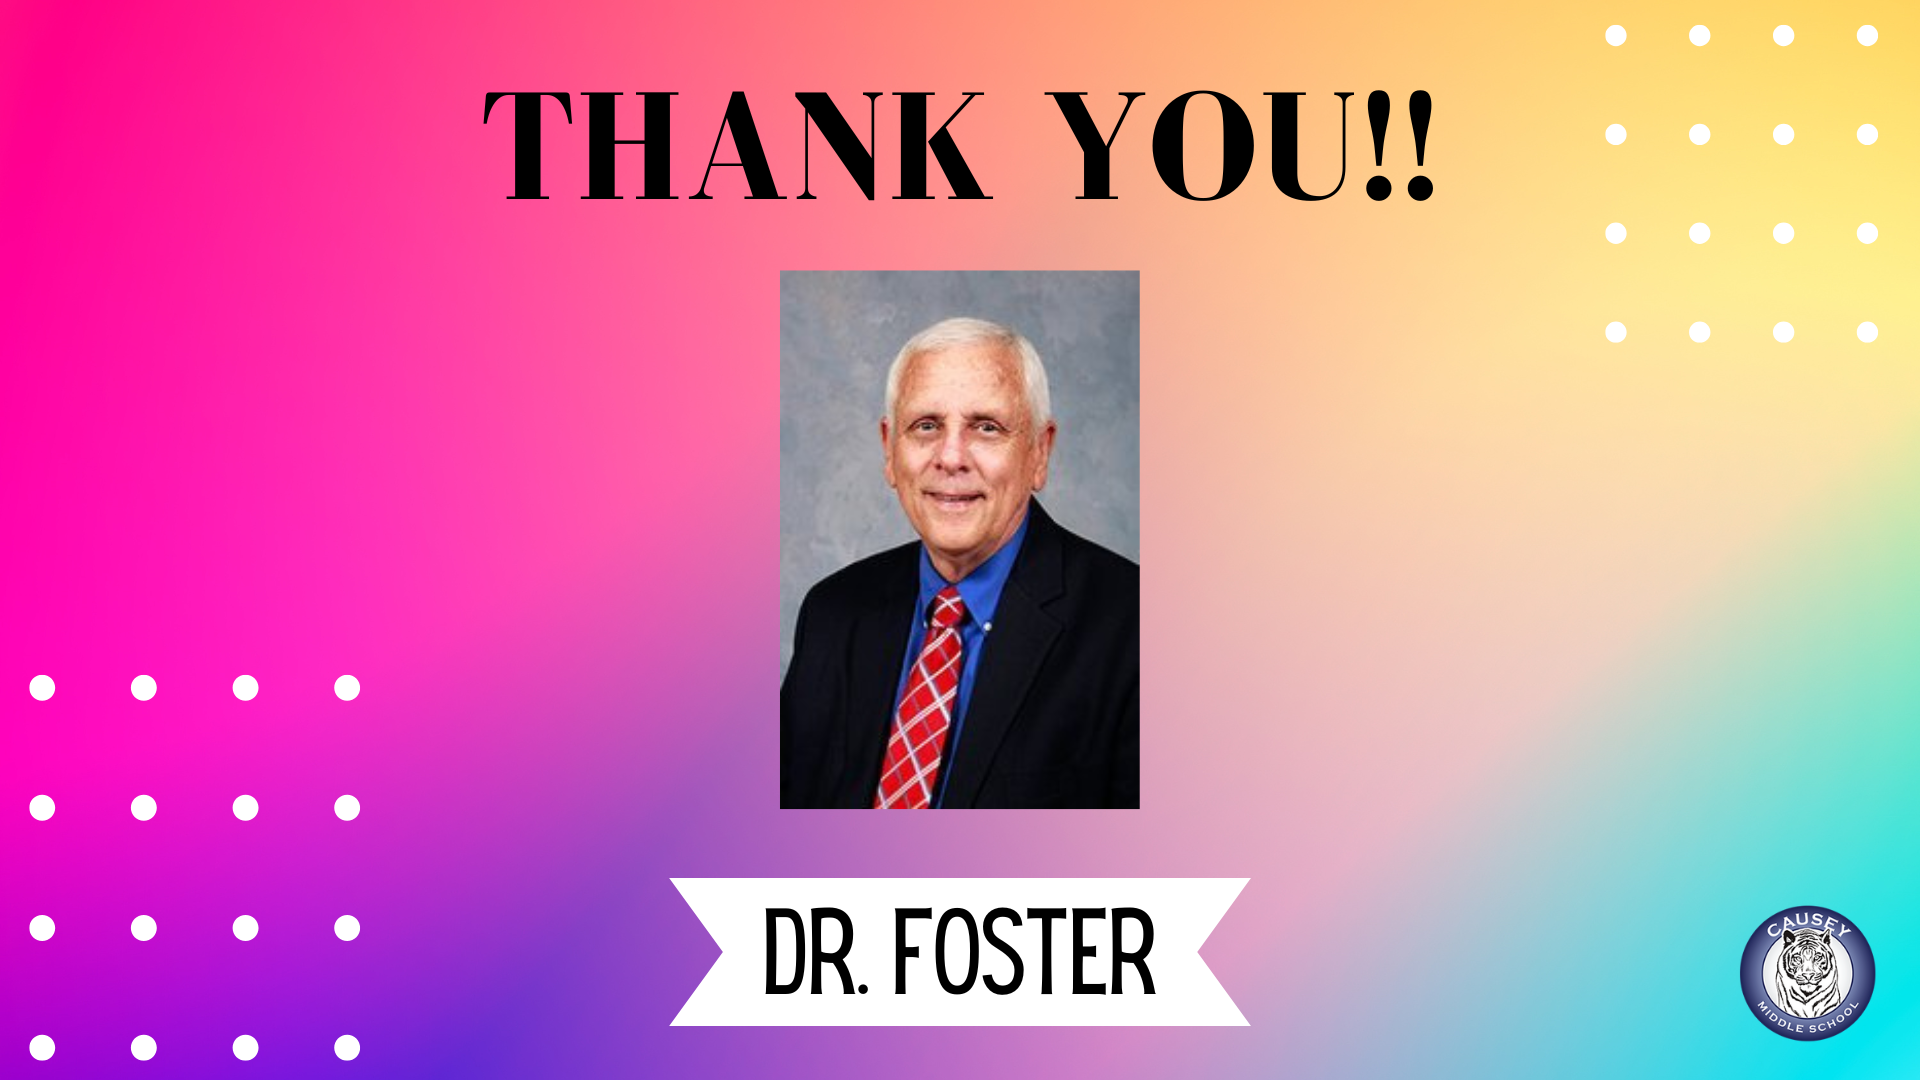 Thank you, Dr. Foster